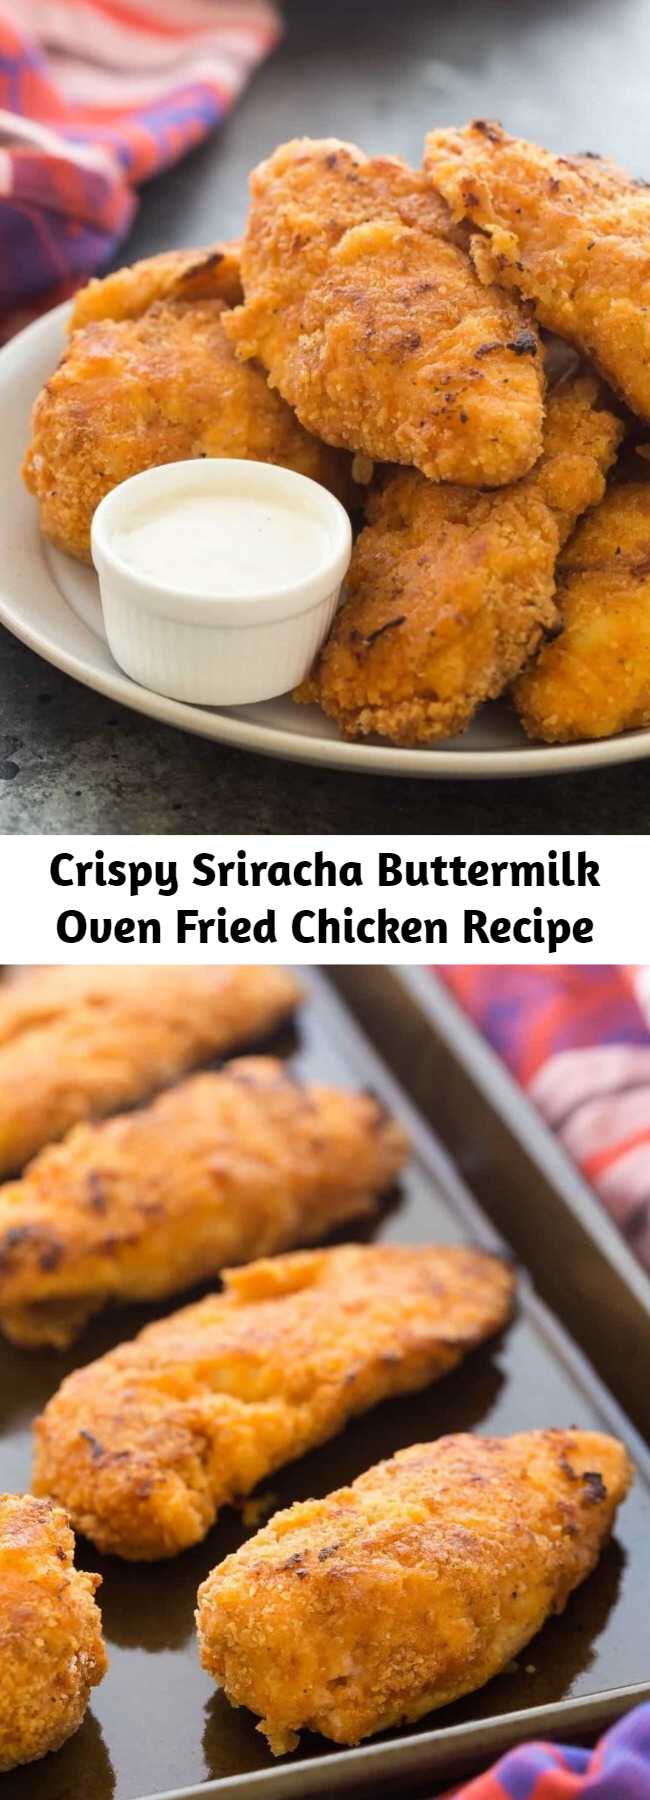 Crispy Sriracha Buttermilk Oven Fried Chicken Recipe - This Crispy Sriracha Buttermilk Oven Fried Chicken is so moist and juicy with just the right amount of spice! It’s baked and not fried so it’s healthier, but you still get that great crunchy coating. #chicken #friedchicken #dinner #appetizer #gameday #snack